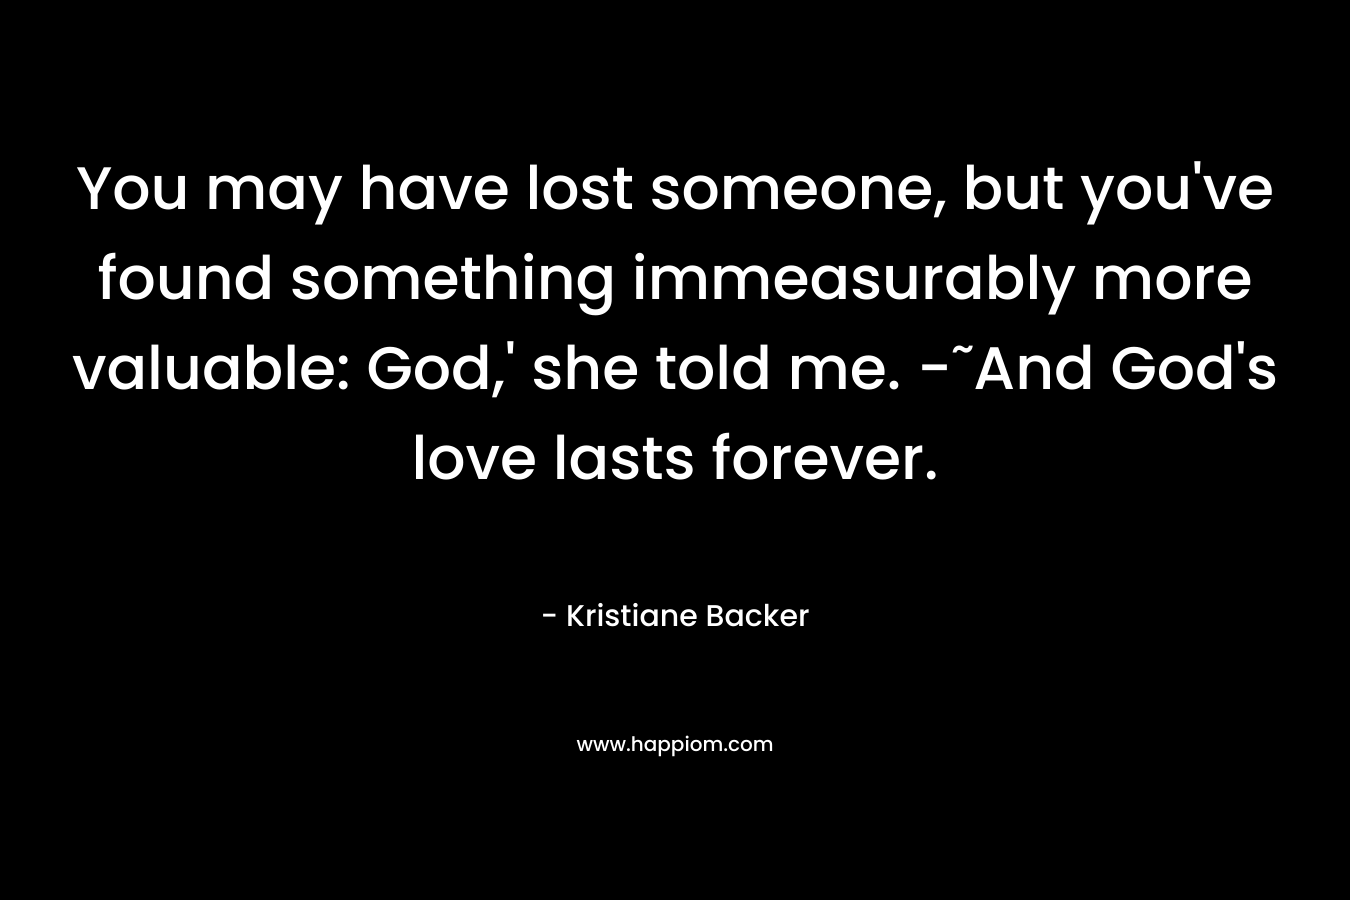 You may have lost someone, but you’ve found something immeasurably more valuable: God,’ she told me. -˜And God’s love lasts forever. – Kristiane Backer